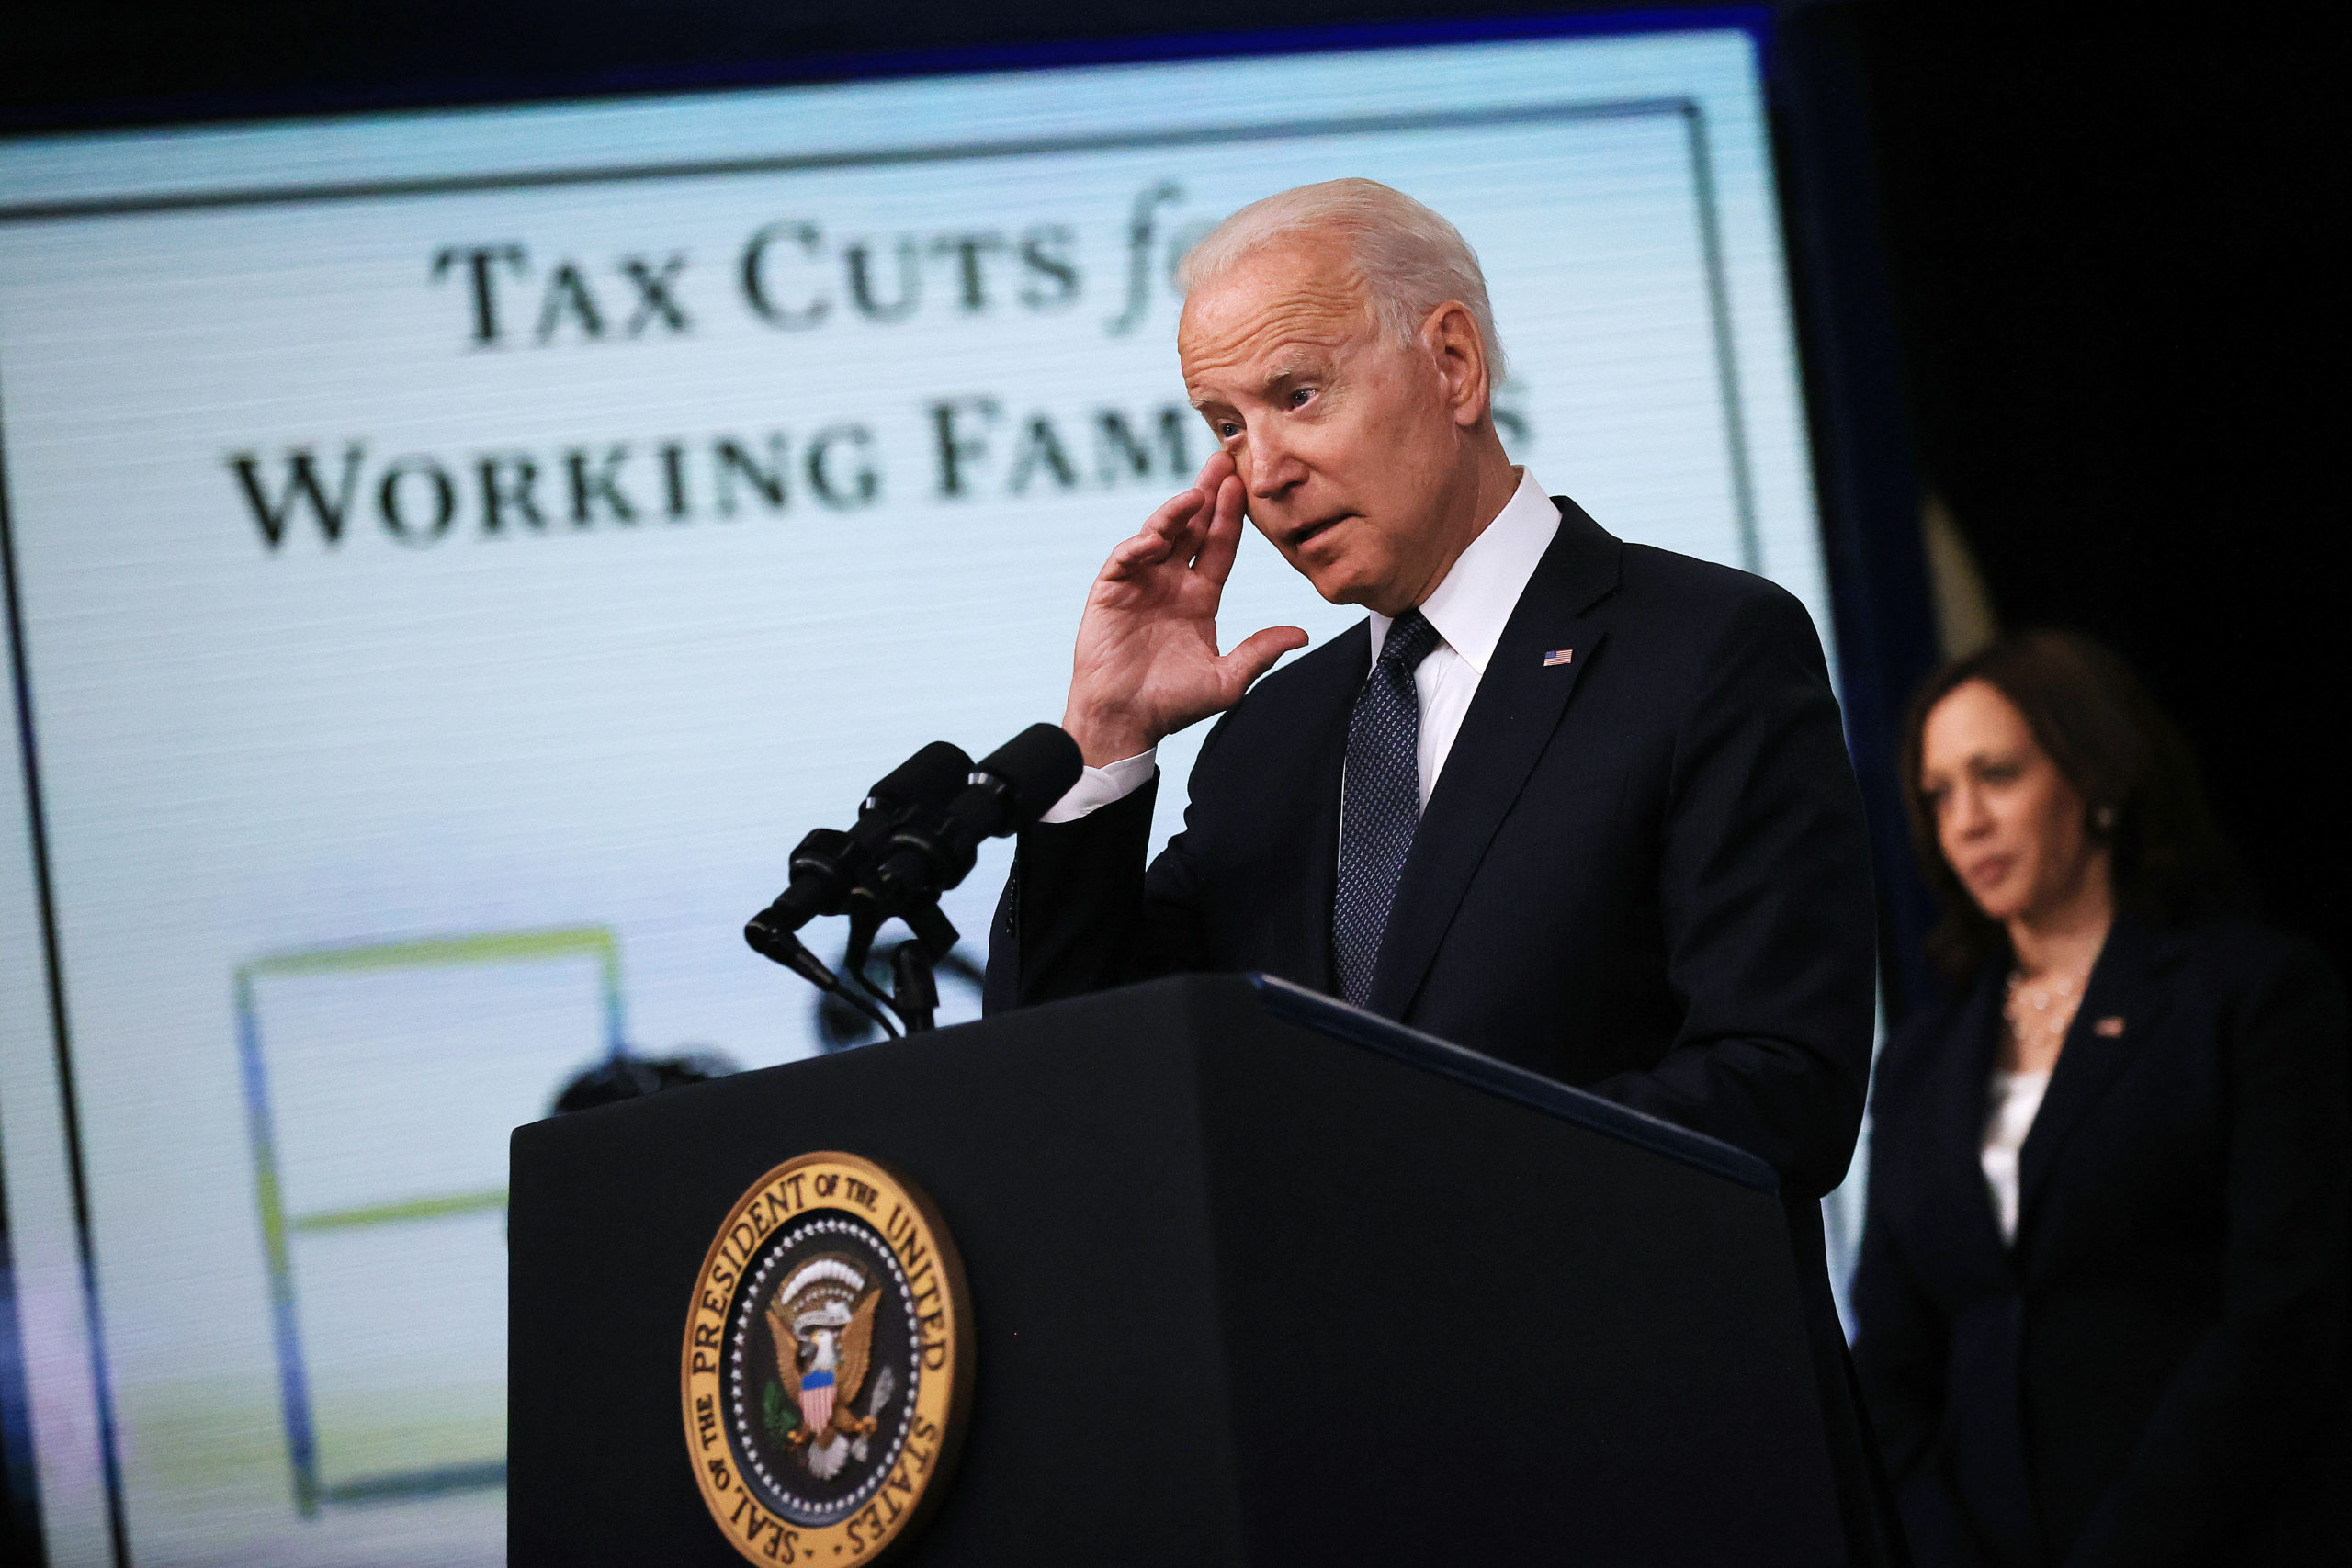 President Joe Biden delivers remarks in July on the Child Tax Credit which Democrats are trying to extend as part of their budget. (Chip Somodevilla/Getty Images)